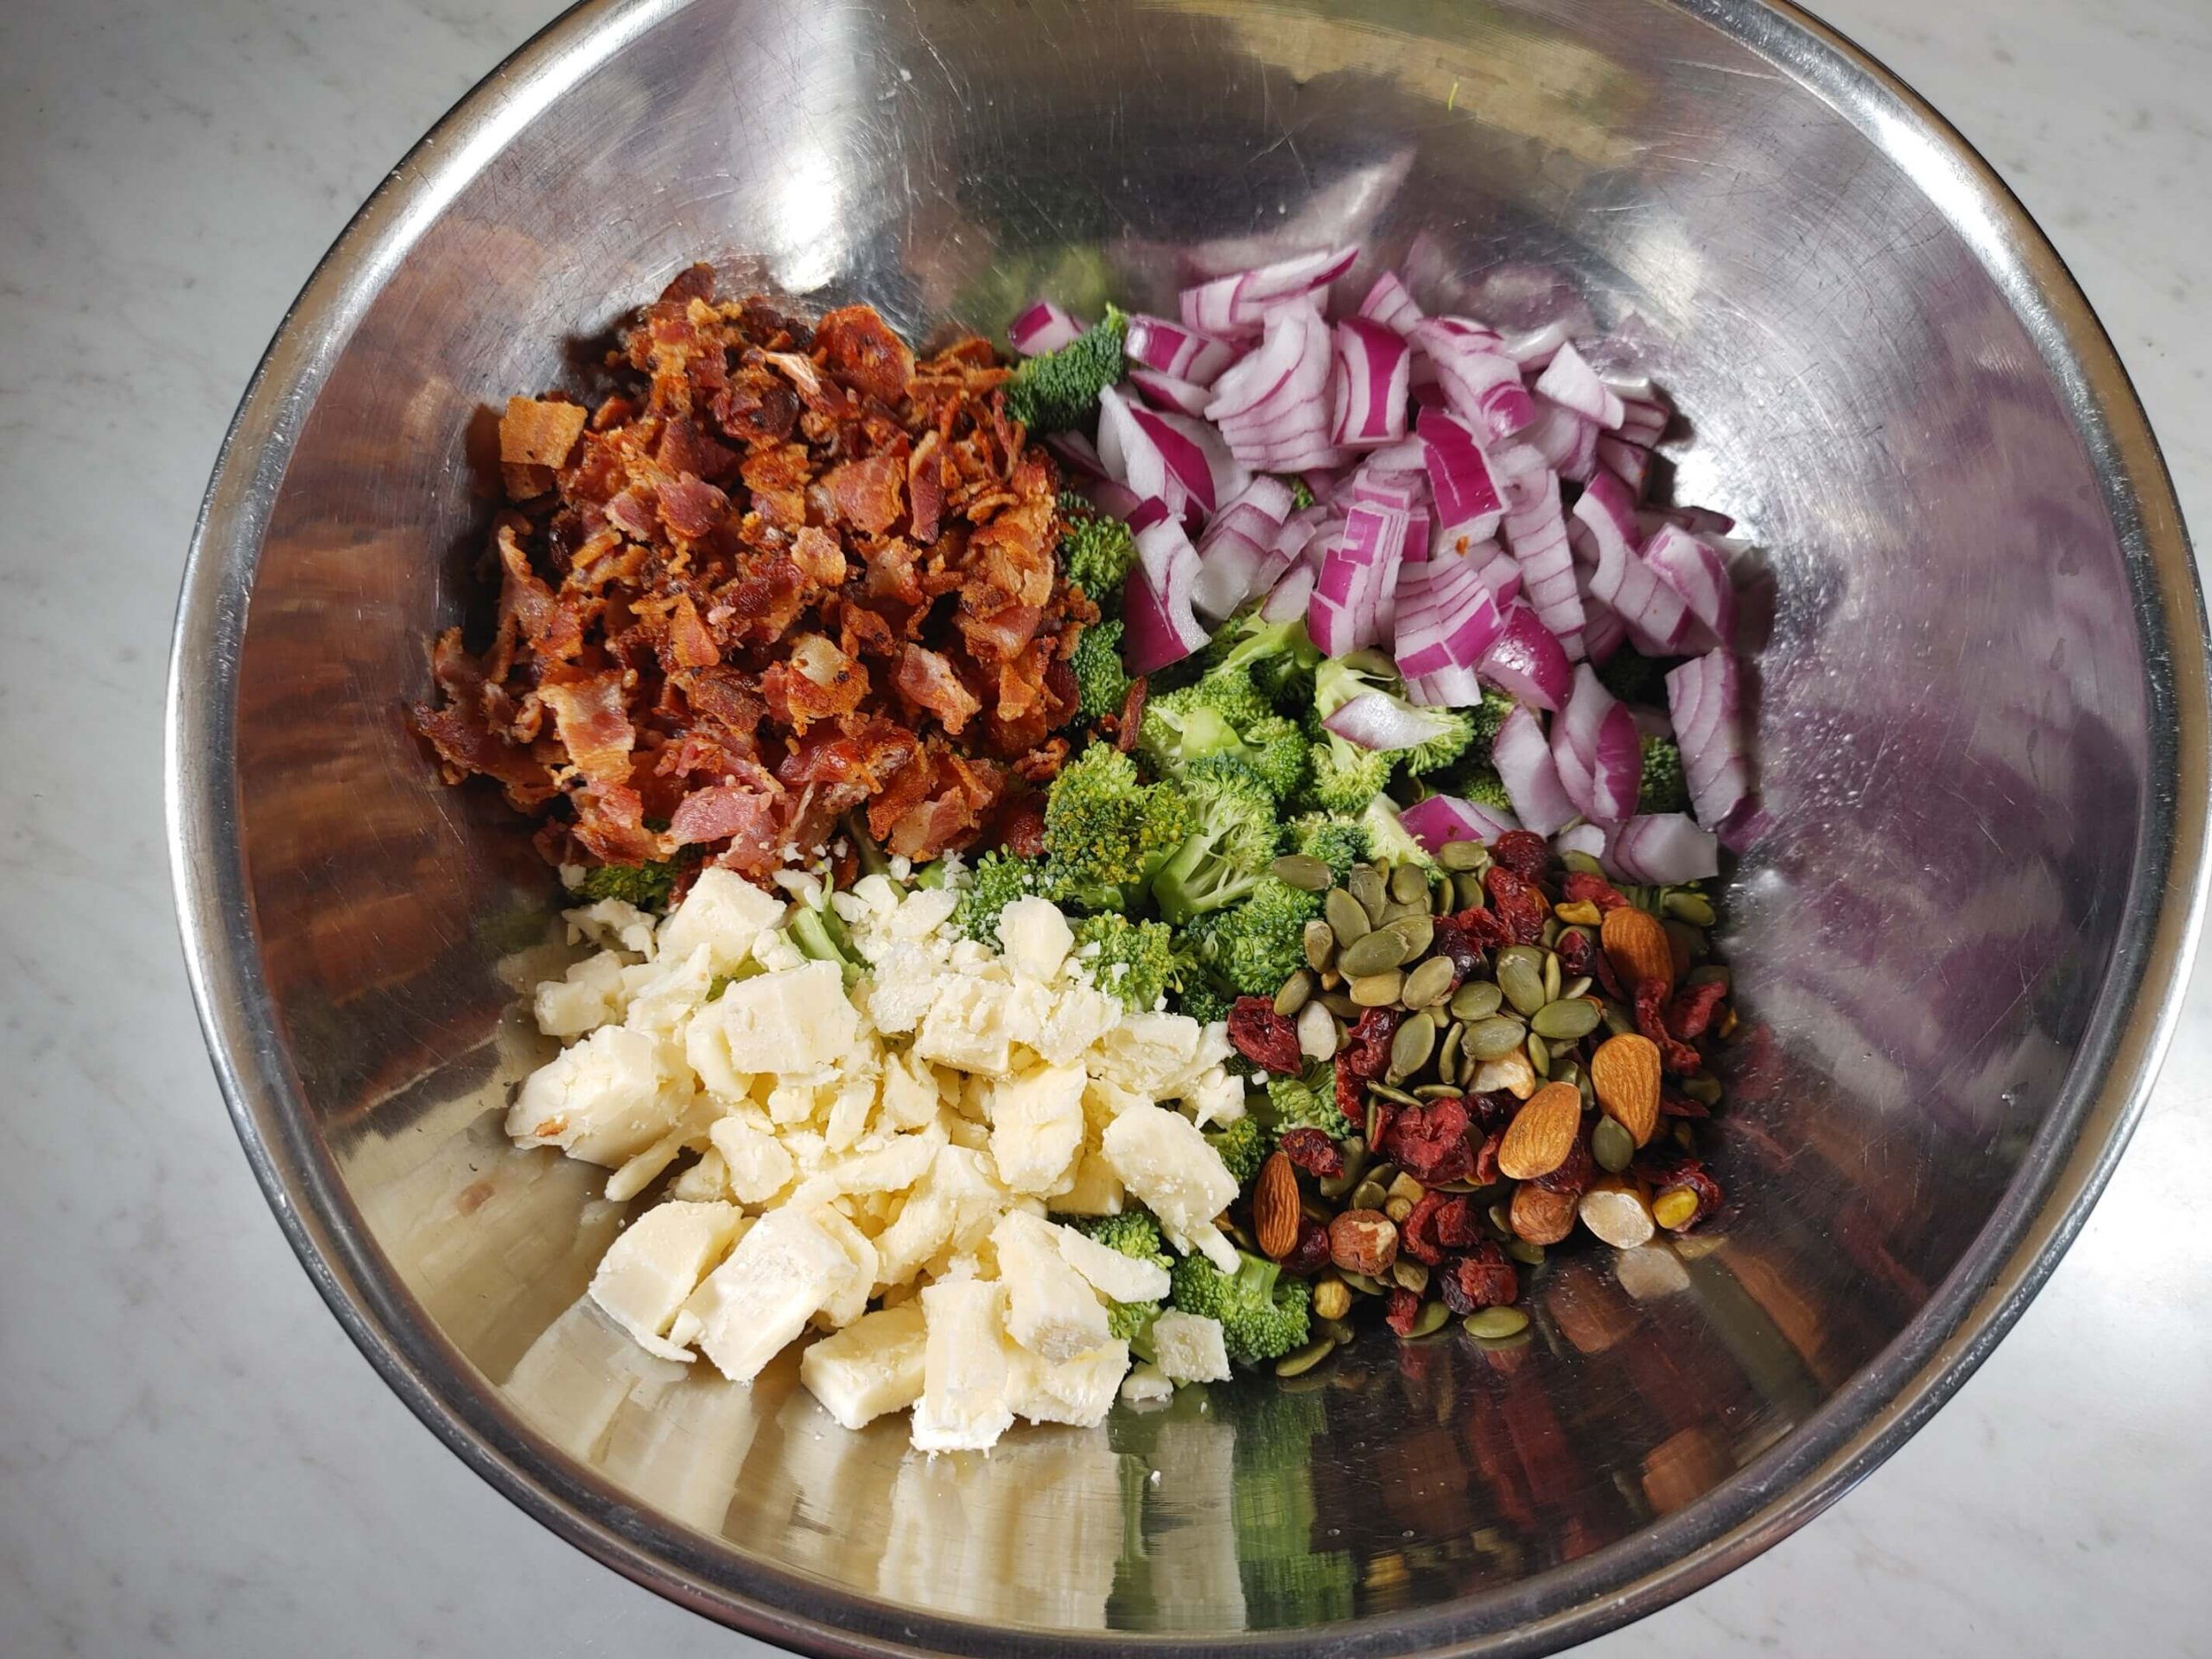 INGREDIENTS COMBINED IN BOWL